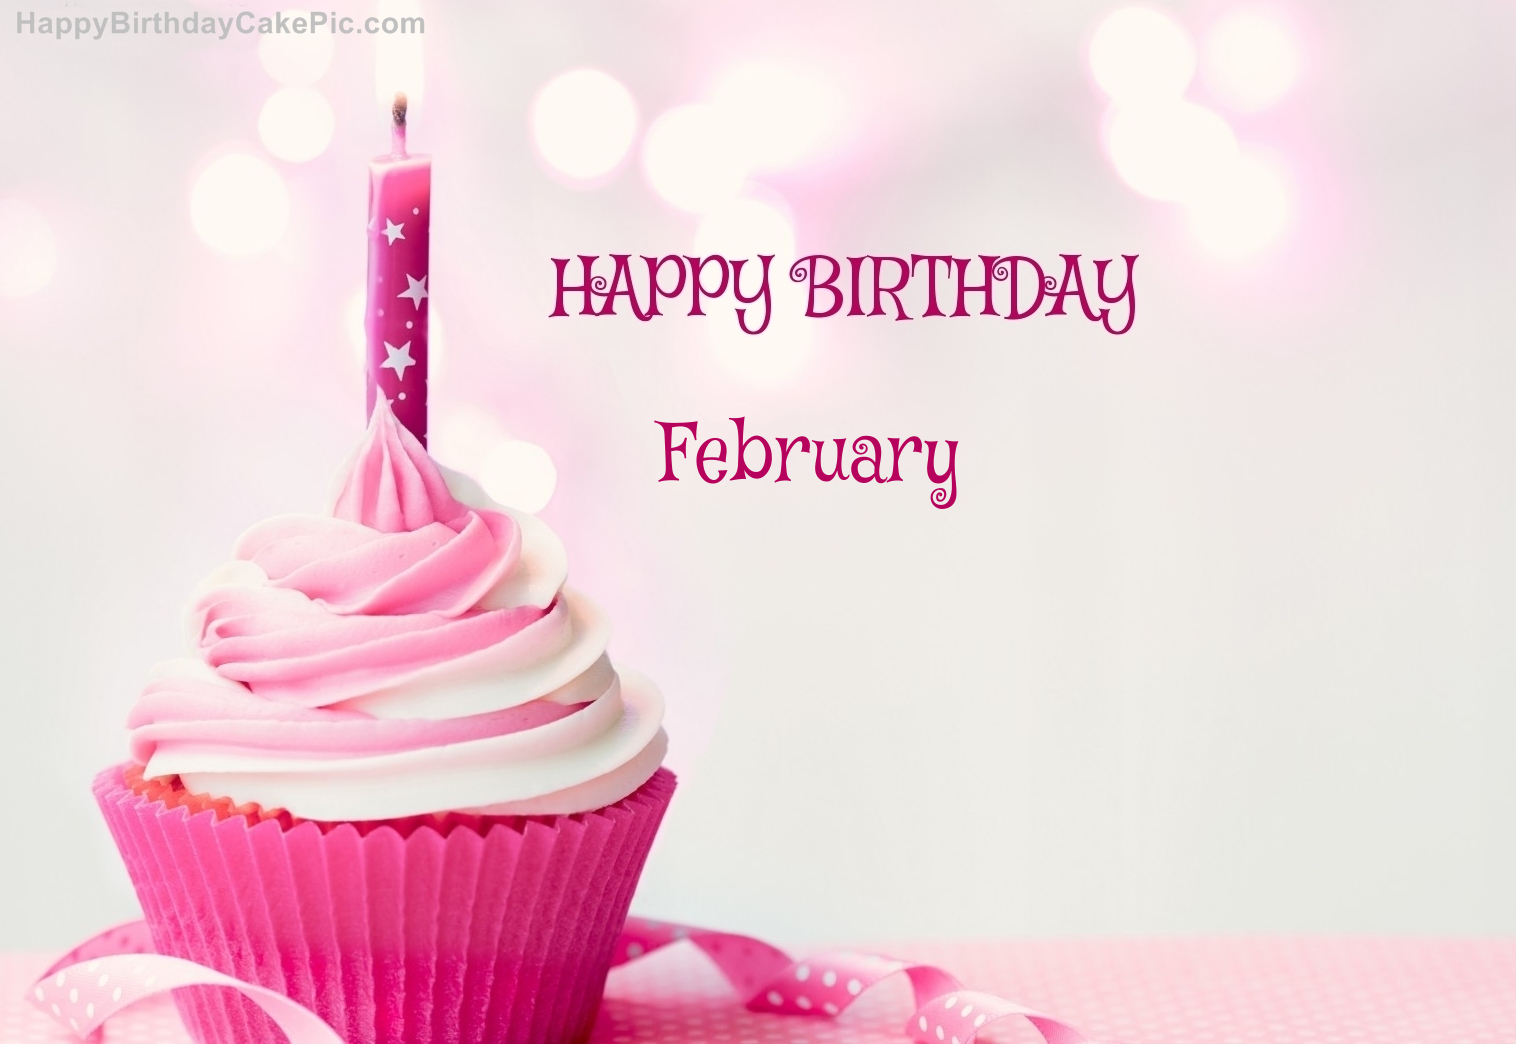 Image result for happy birthday february cupcake images